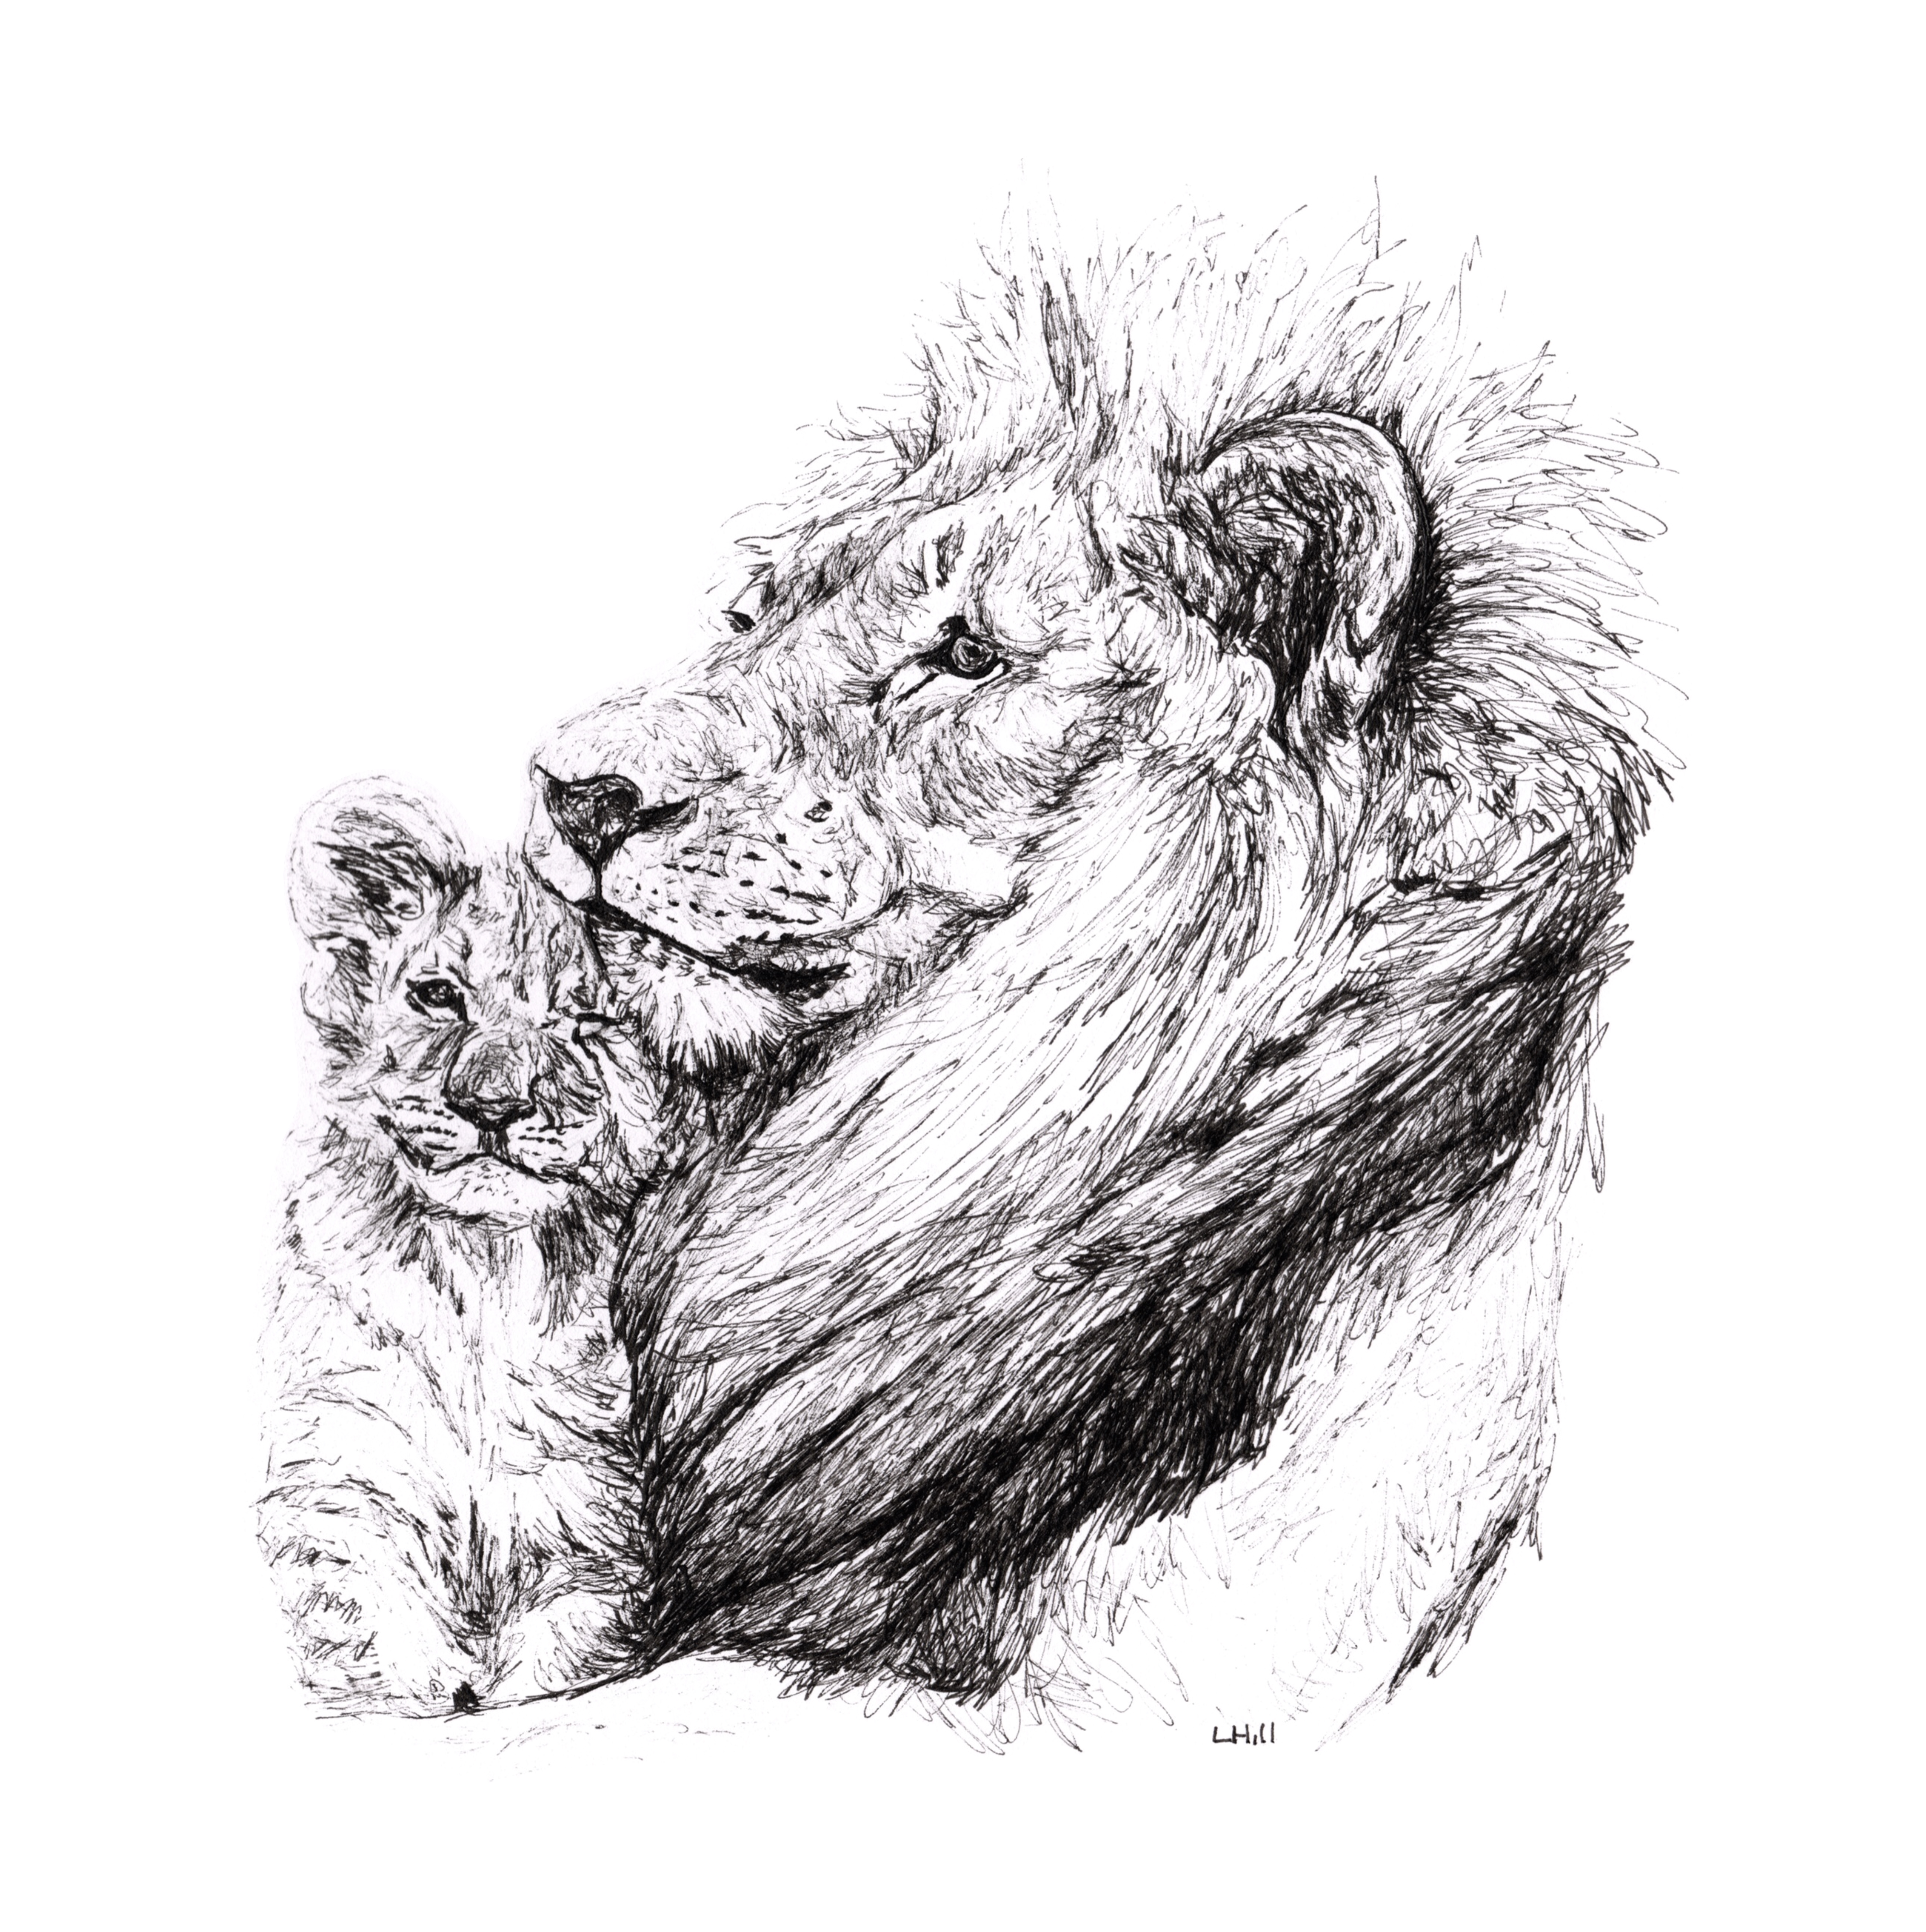 Lion and cub pen and ink illustration by Louisa Hill